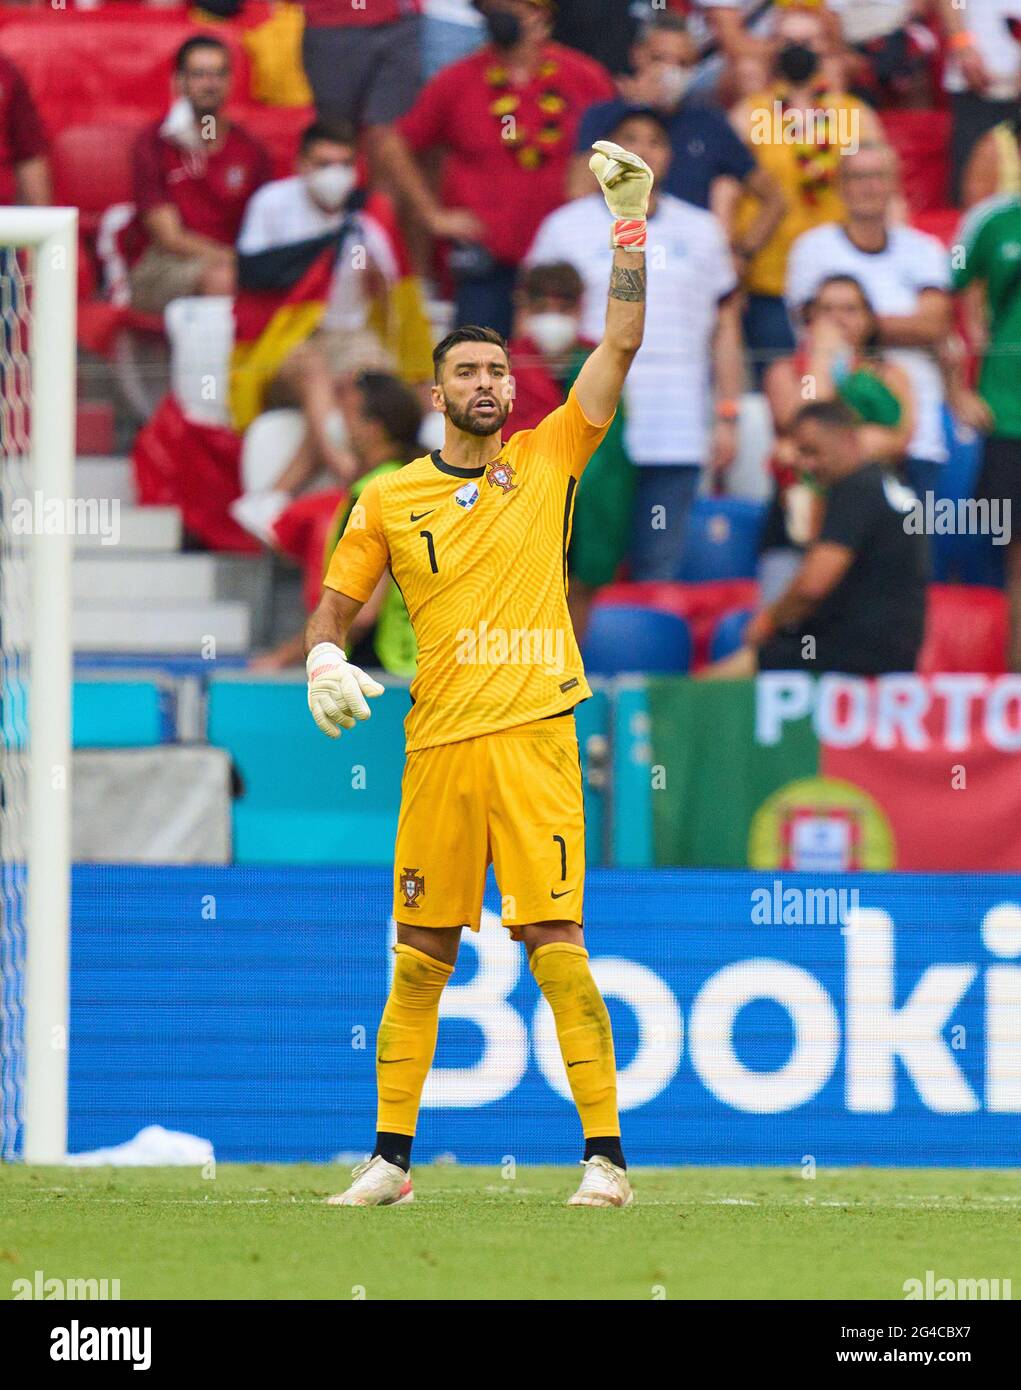 Munich, Germany. 19th June, 2021. Rui PATRICIO, Por 1 in the Group F match PORTUGAL, Germany. , . in Season 2020/2021 on June 19, 2021 in Munich, Germany. Credit: Peter Schatz/Alamy Live News Stock Photo